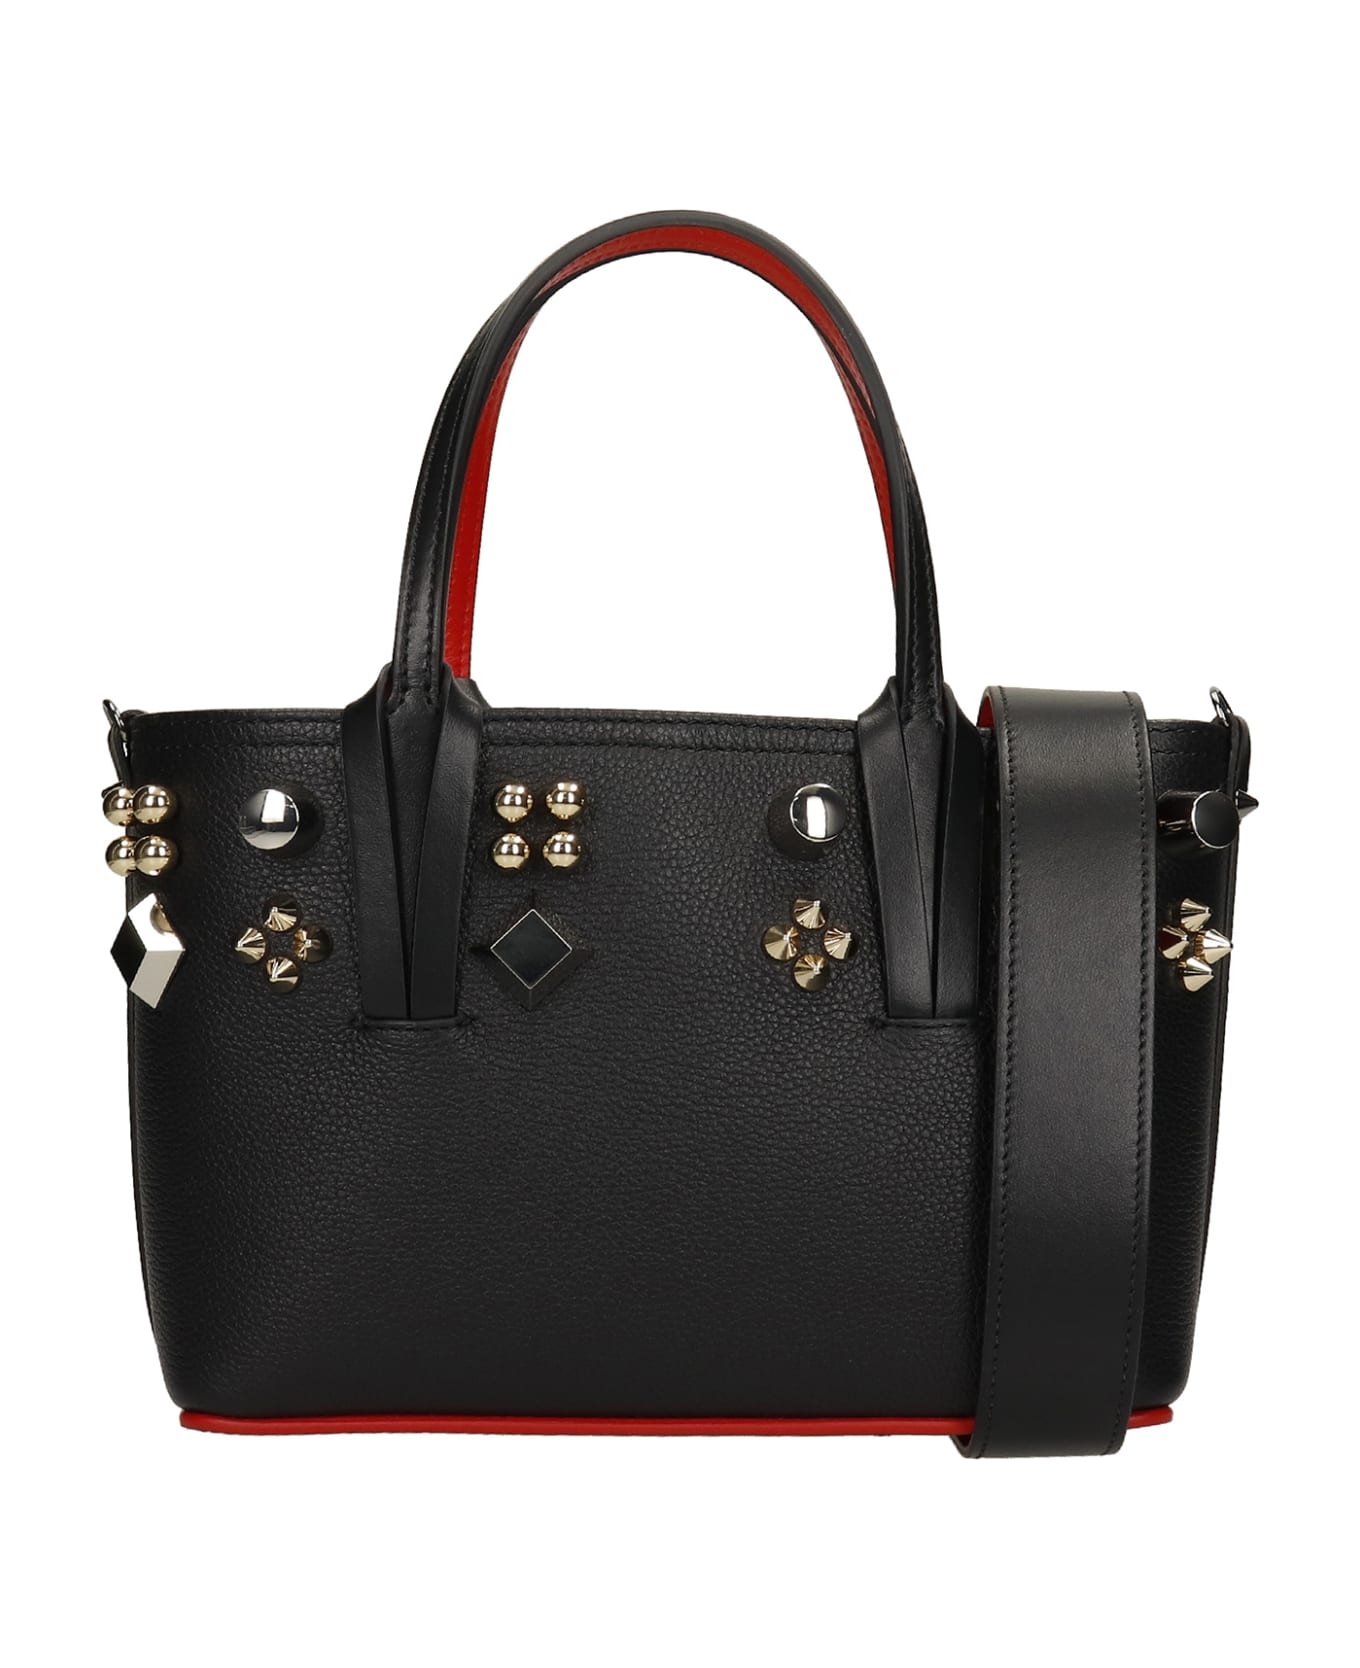 Christian Louboutin Tote In Black Leather - black